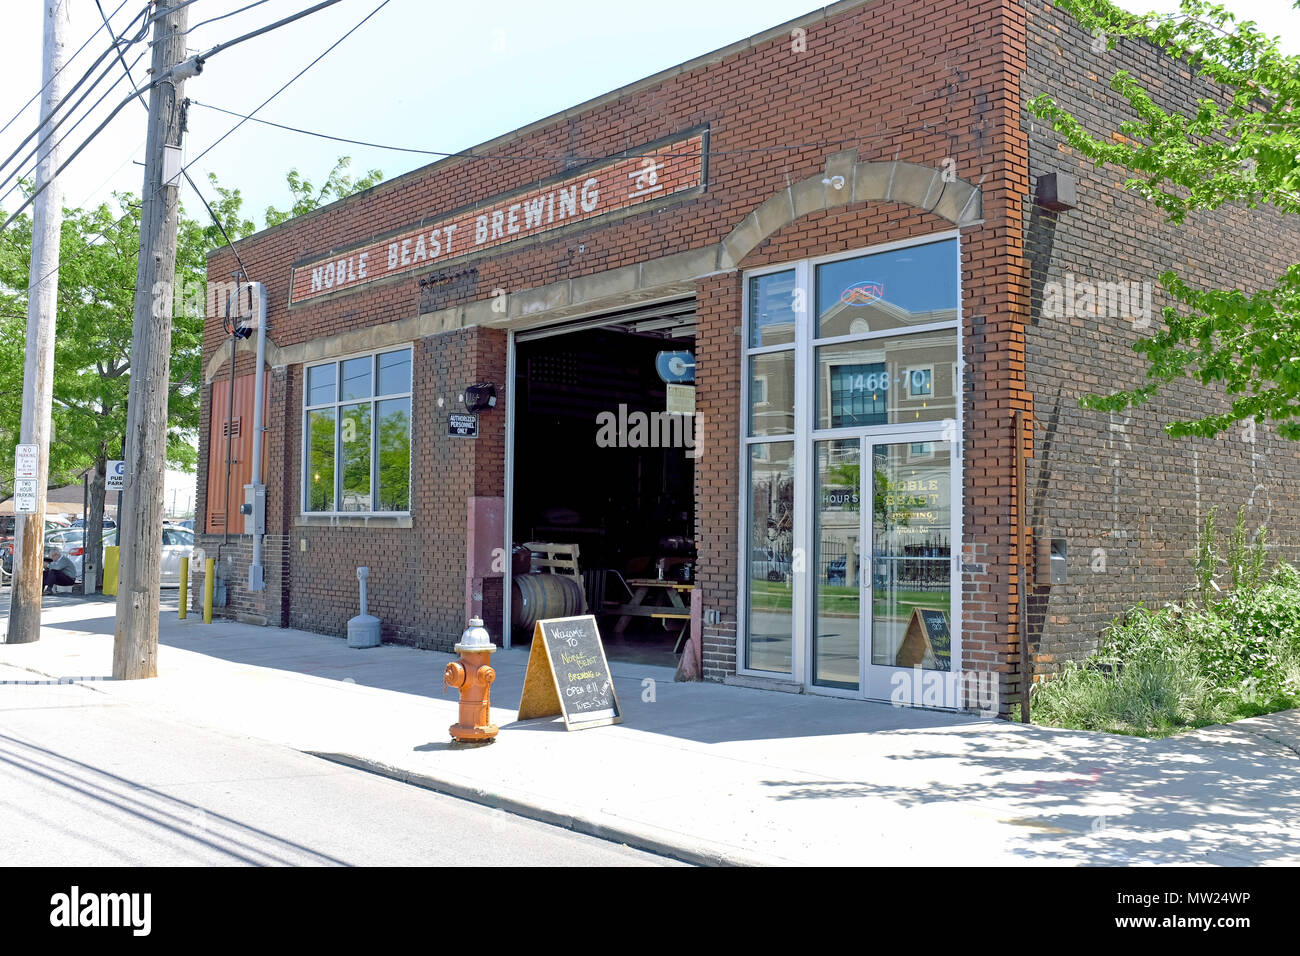 Noble Beast Brewing on Lakeside Avenue in downtown Cleveland, Ohio, is one of several new breweries surfacing in the Cleveland, Ohio gastronomy scene. Stock Photo